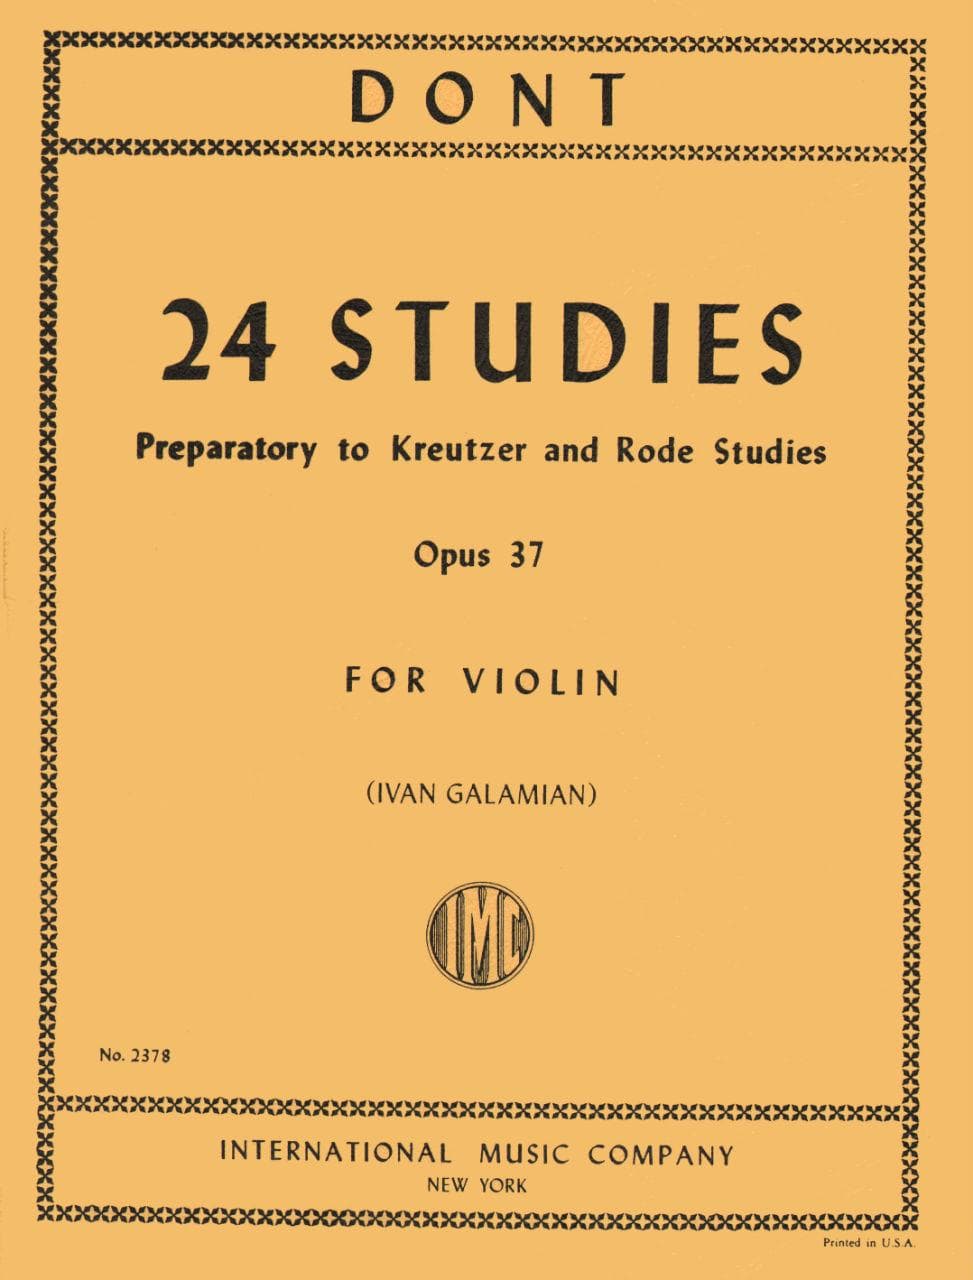 Dont, Jakob - 24 Studies, Op 37: Preparatory to Kreutzer and Rode Studies - Violin solo - edited by Ivan Galamian - International Edition